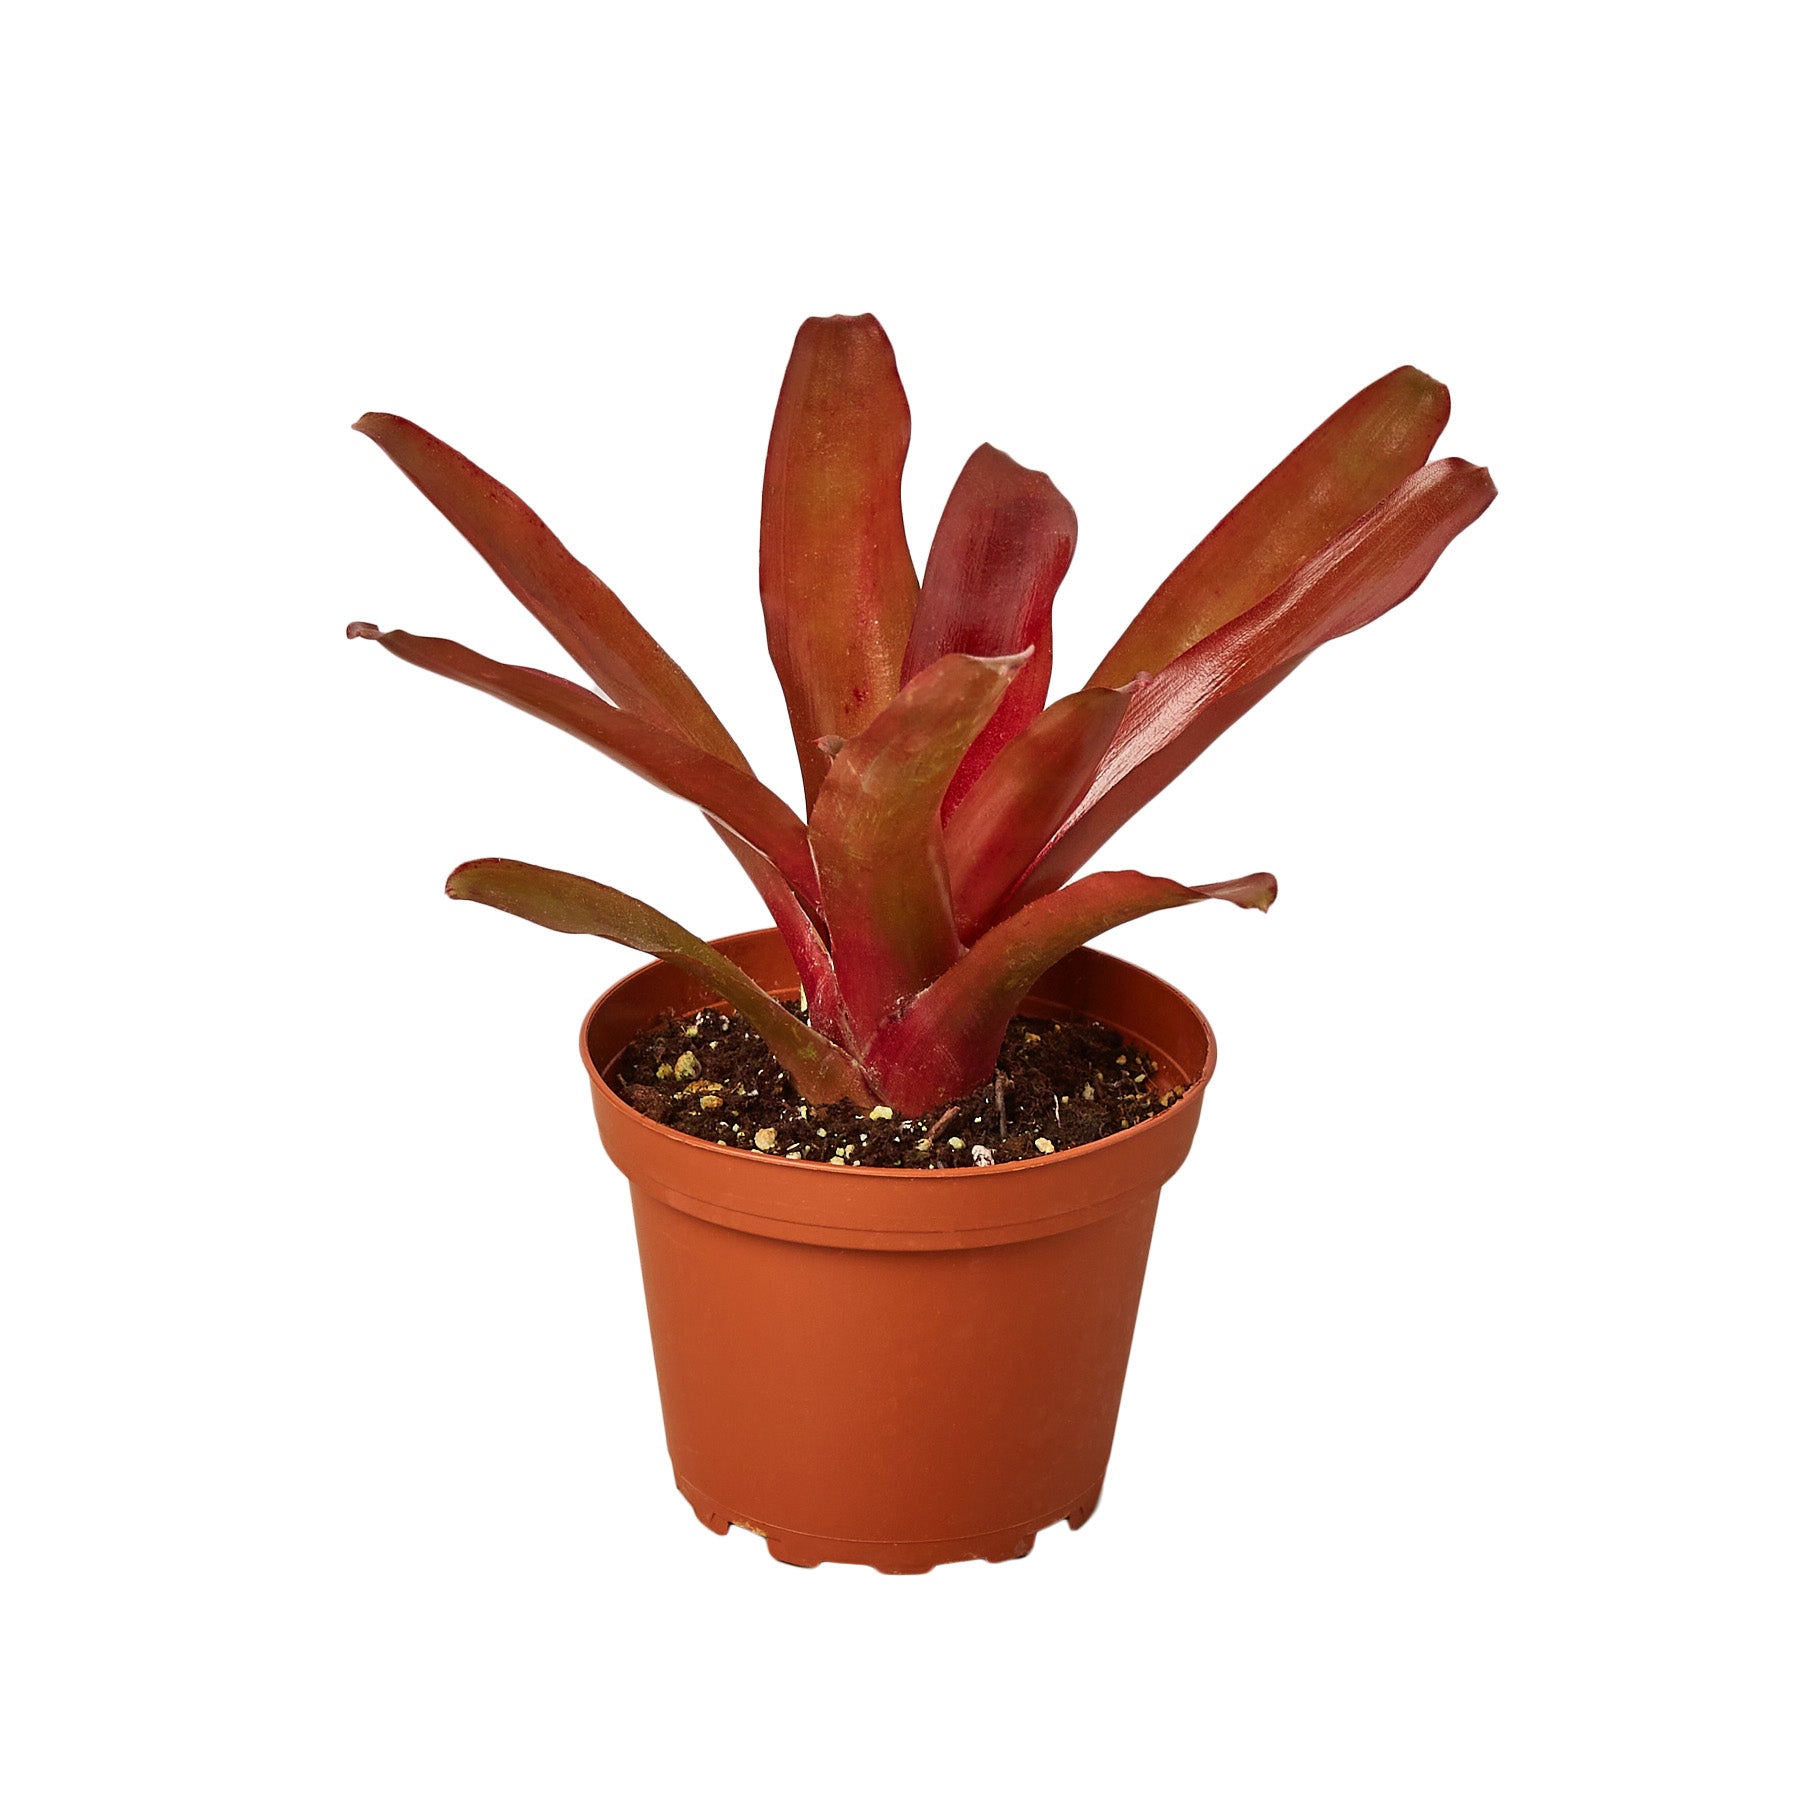 A red plant in a pot on a white background at one of the best garden nurseries near me.